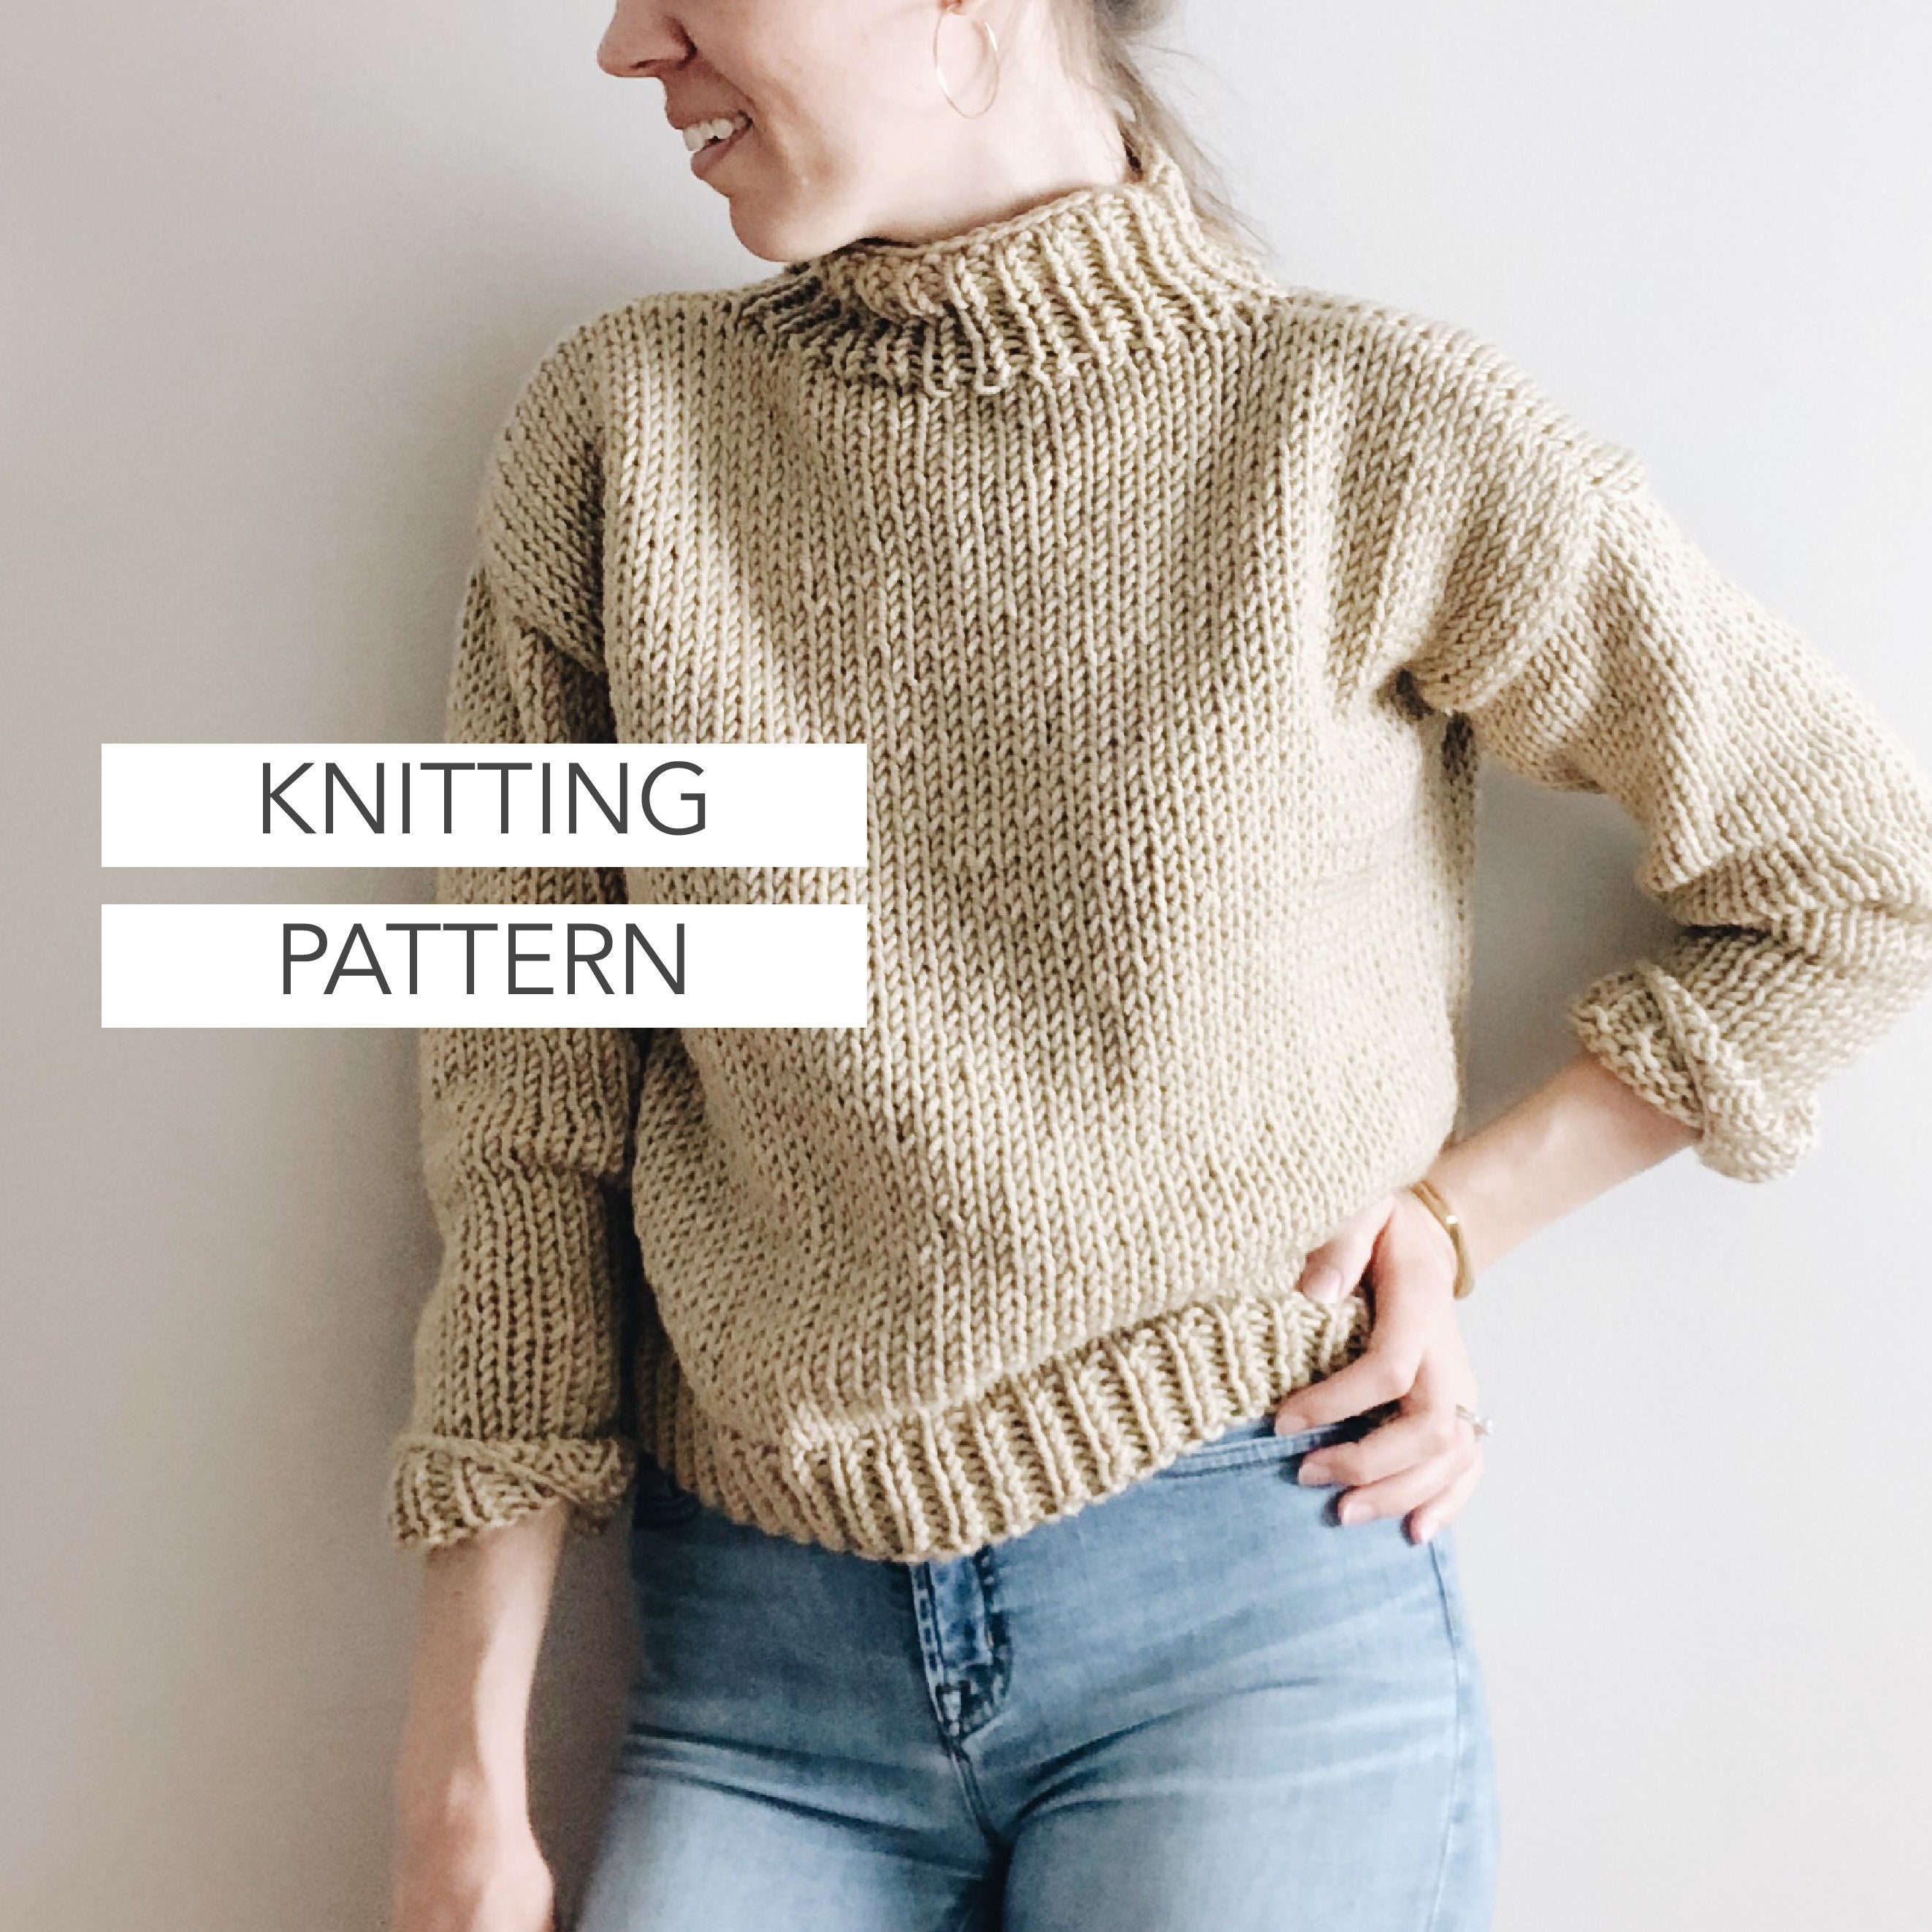 Knitting Pattern The Riley classic timeless turtleneck | Etsy